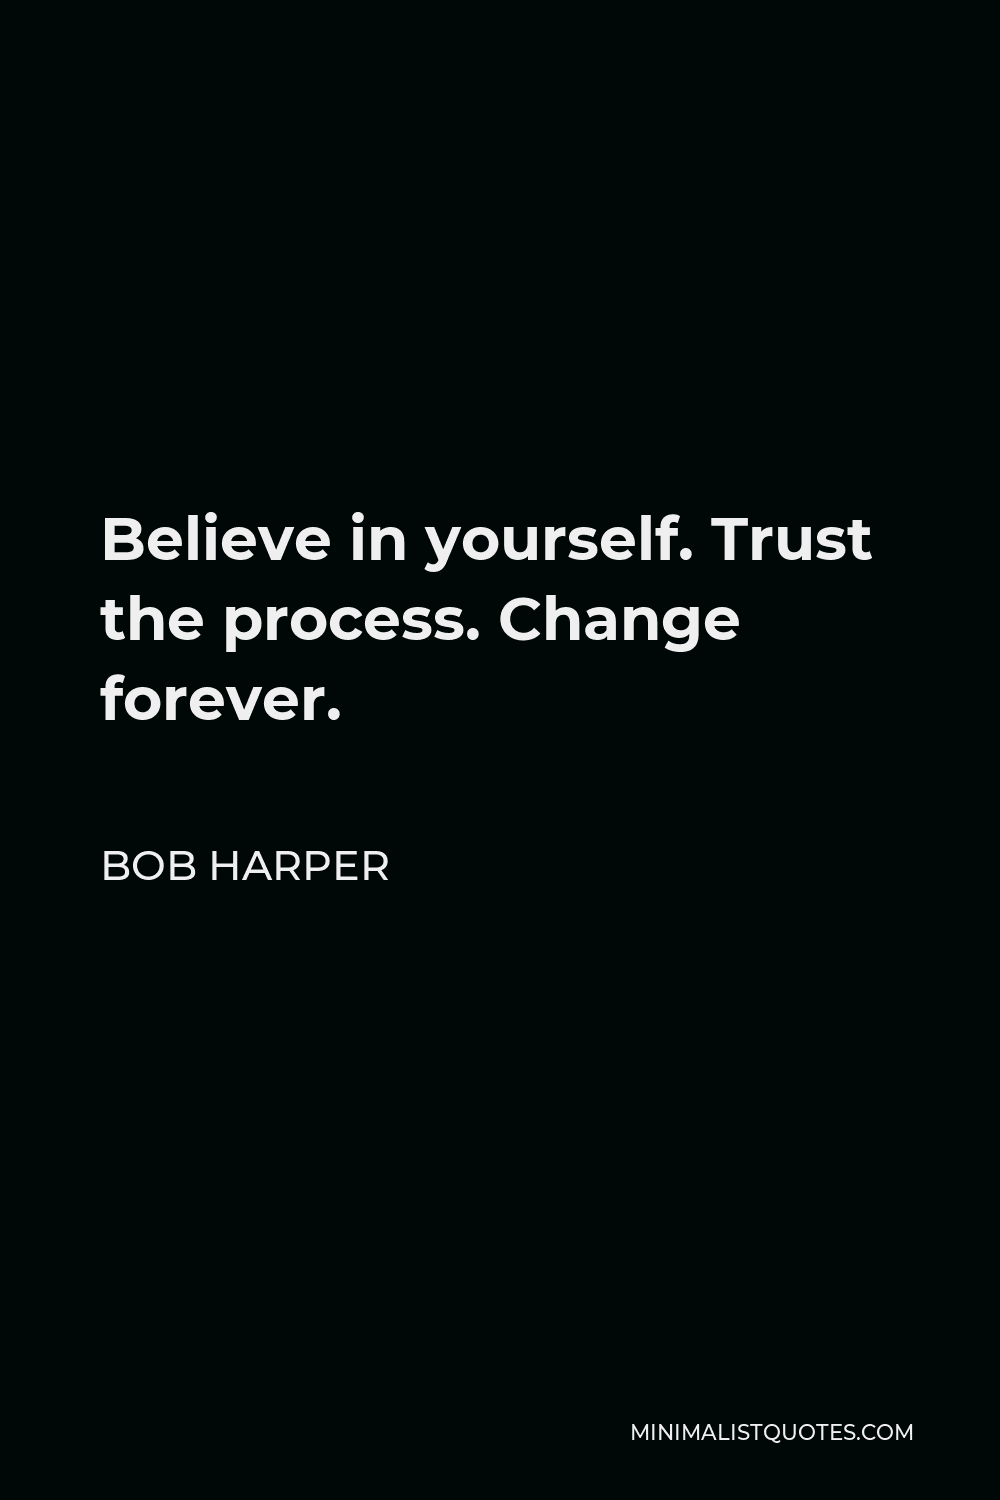 Bob Harper Quote - Believe in yourself. Trust the process. Change forever.